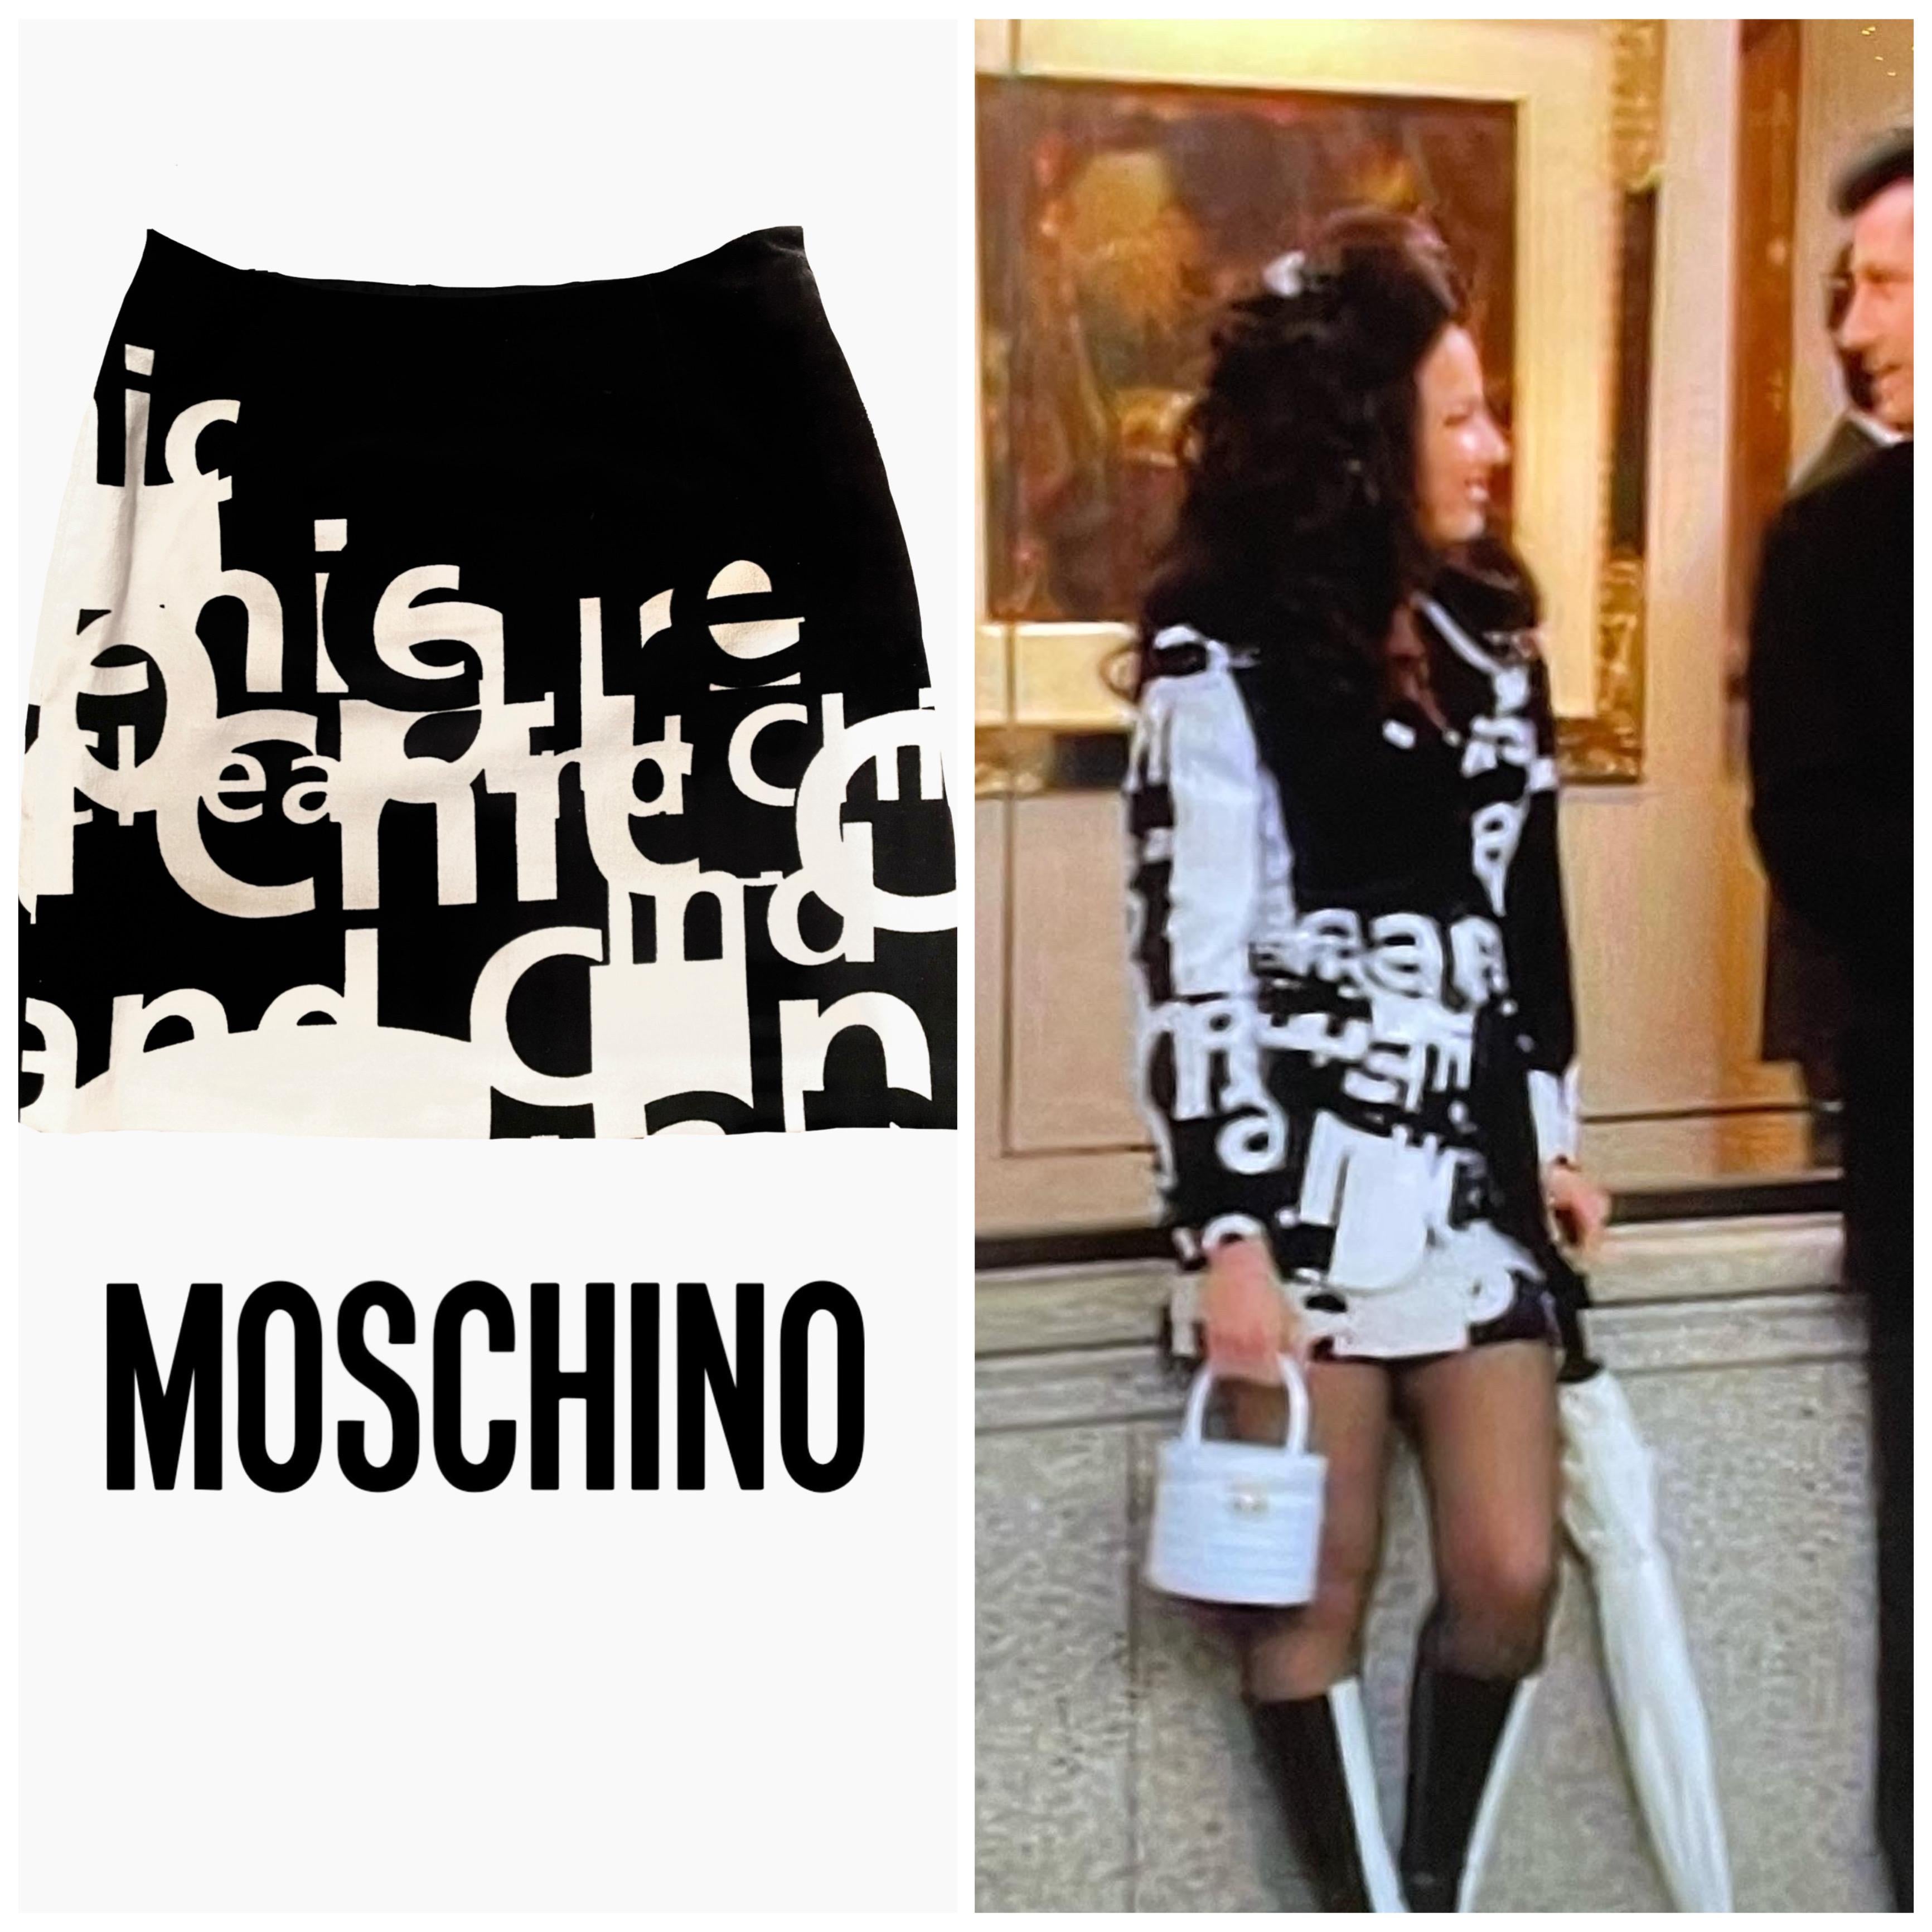 One of a kind velvet vintage 1990s skirt with inscriptions ALL OVER print, by Moschino cheap and chic. this piece as been seen on the iconic  Fran fine on the hit sitcom The NANNY and in many vintage Moschino ads as well as runways. It is in perfect